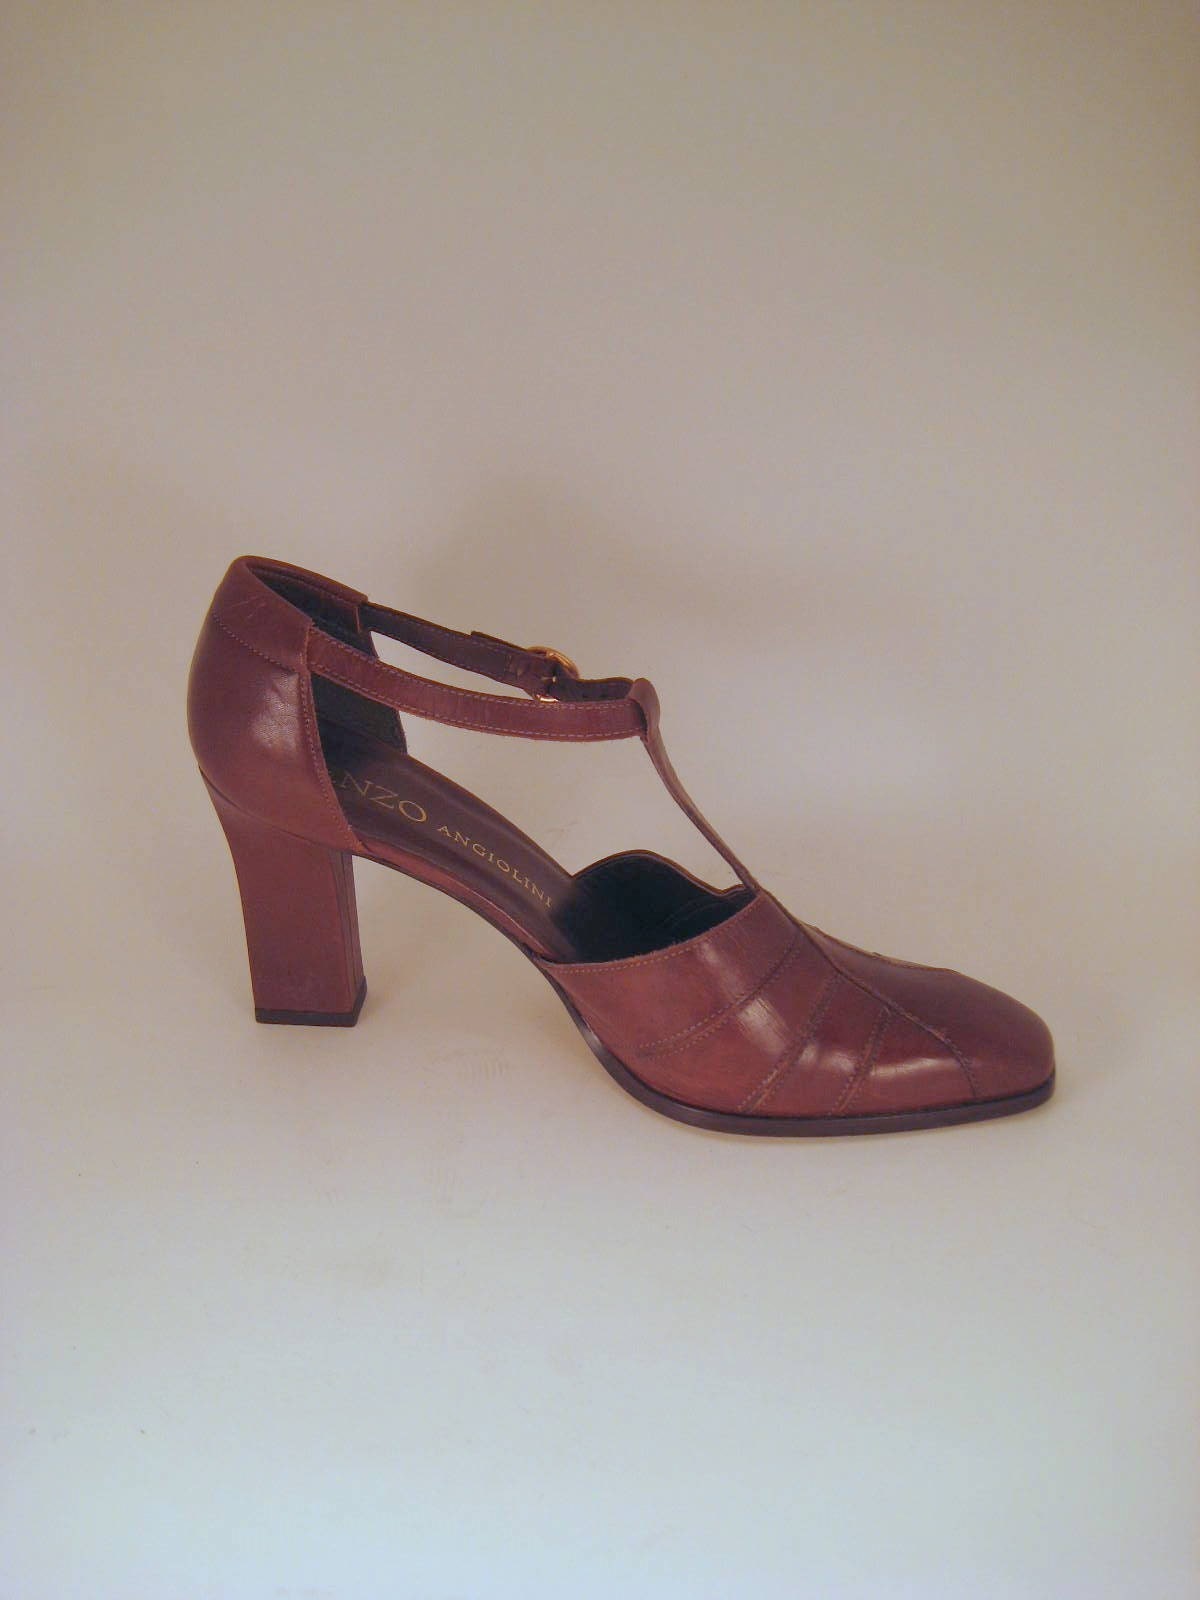 vintage t strap mary jane heel pumps. nutmeg tan leather by